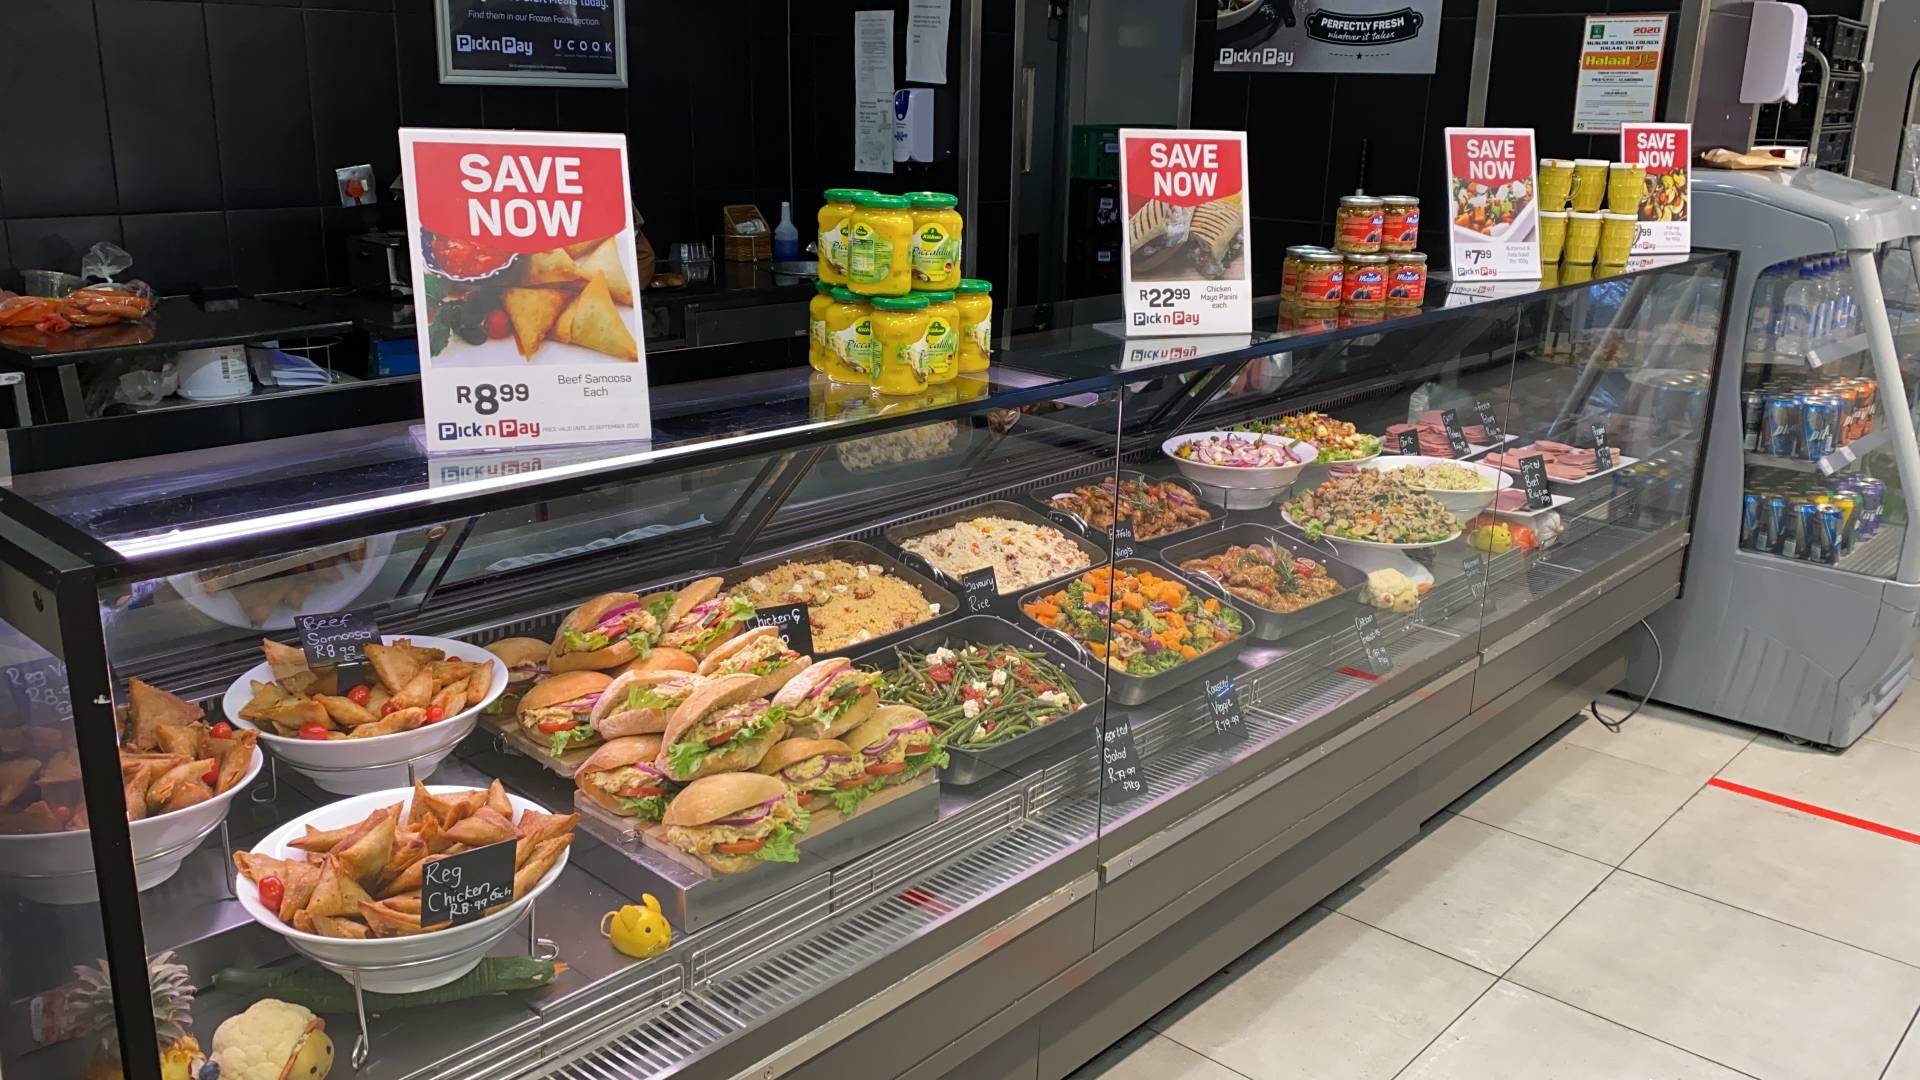 Pick n Pay Claremont